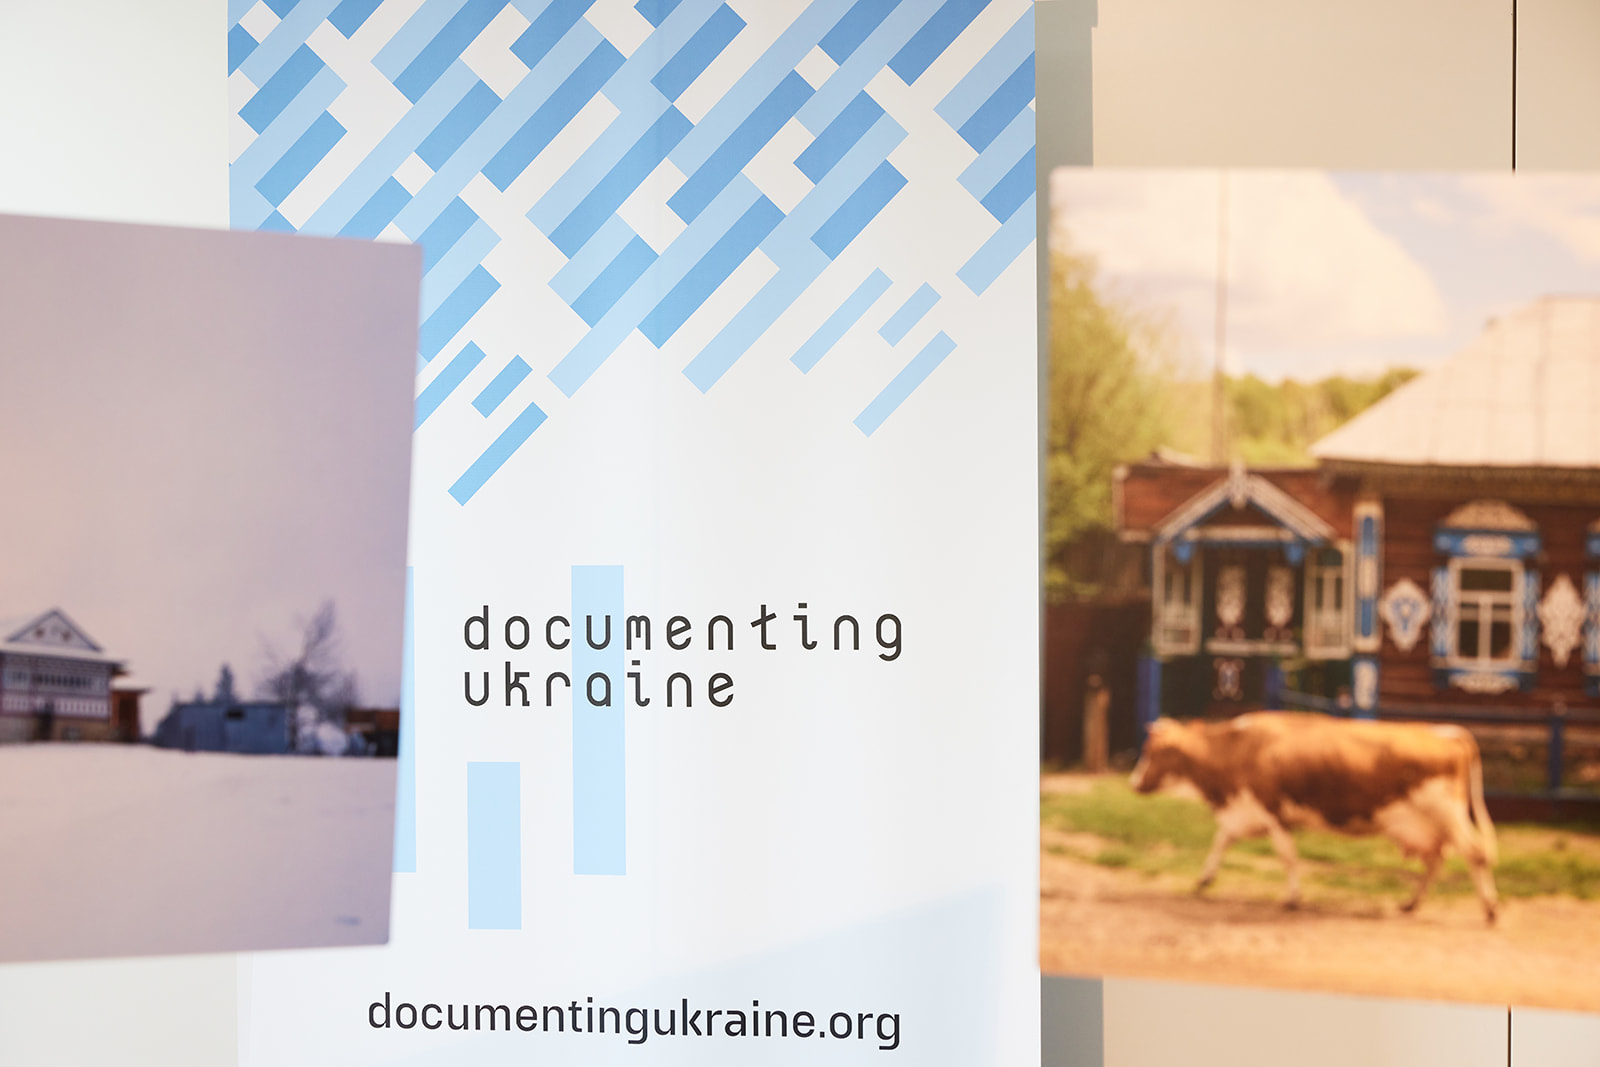 Roll up with Documenting Ukraine project logo and two pictures